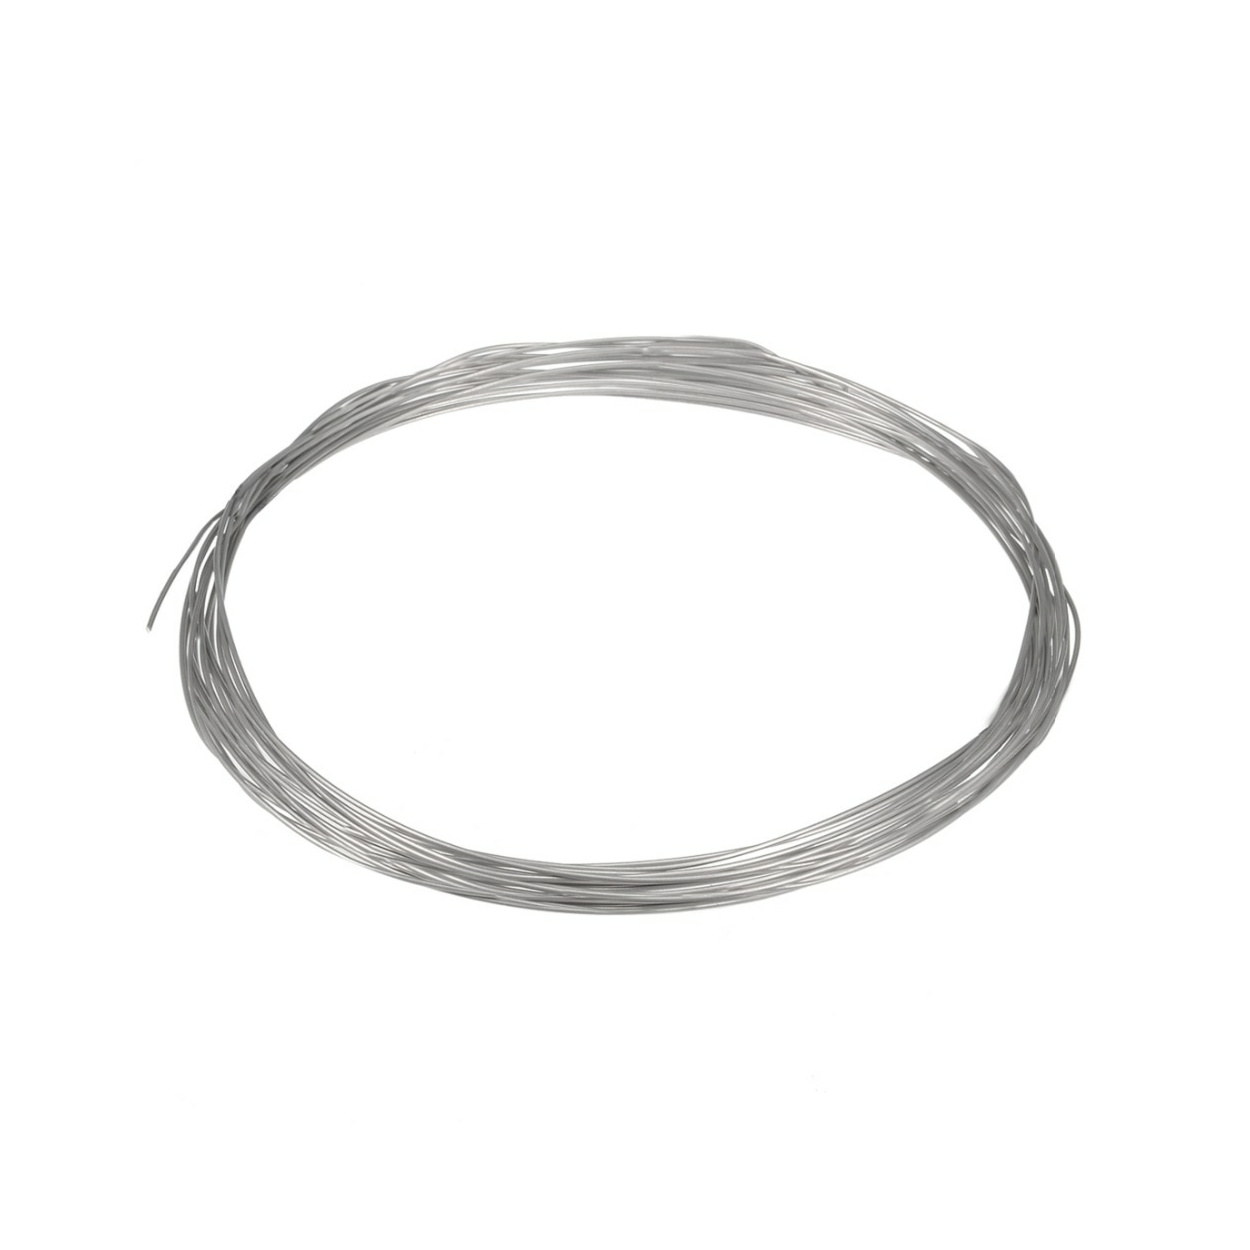 Probots Nichrome Wire for Hobby Electronics Buy Online India